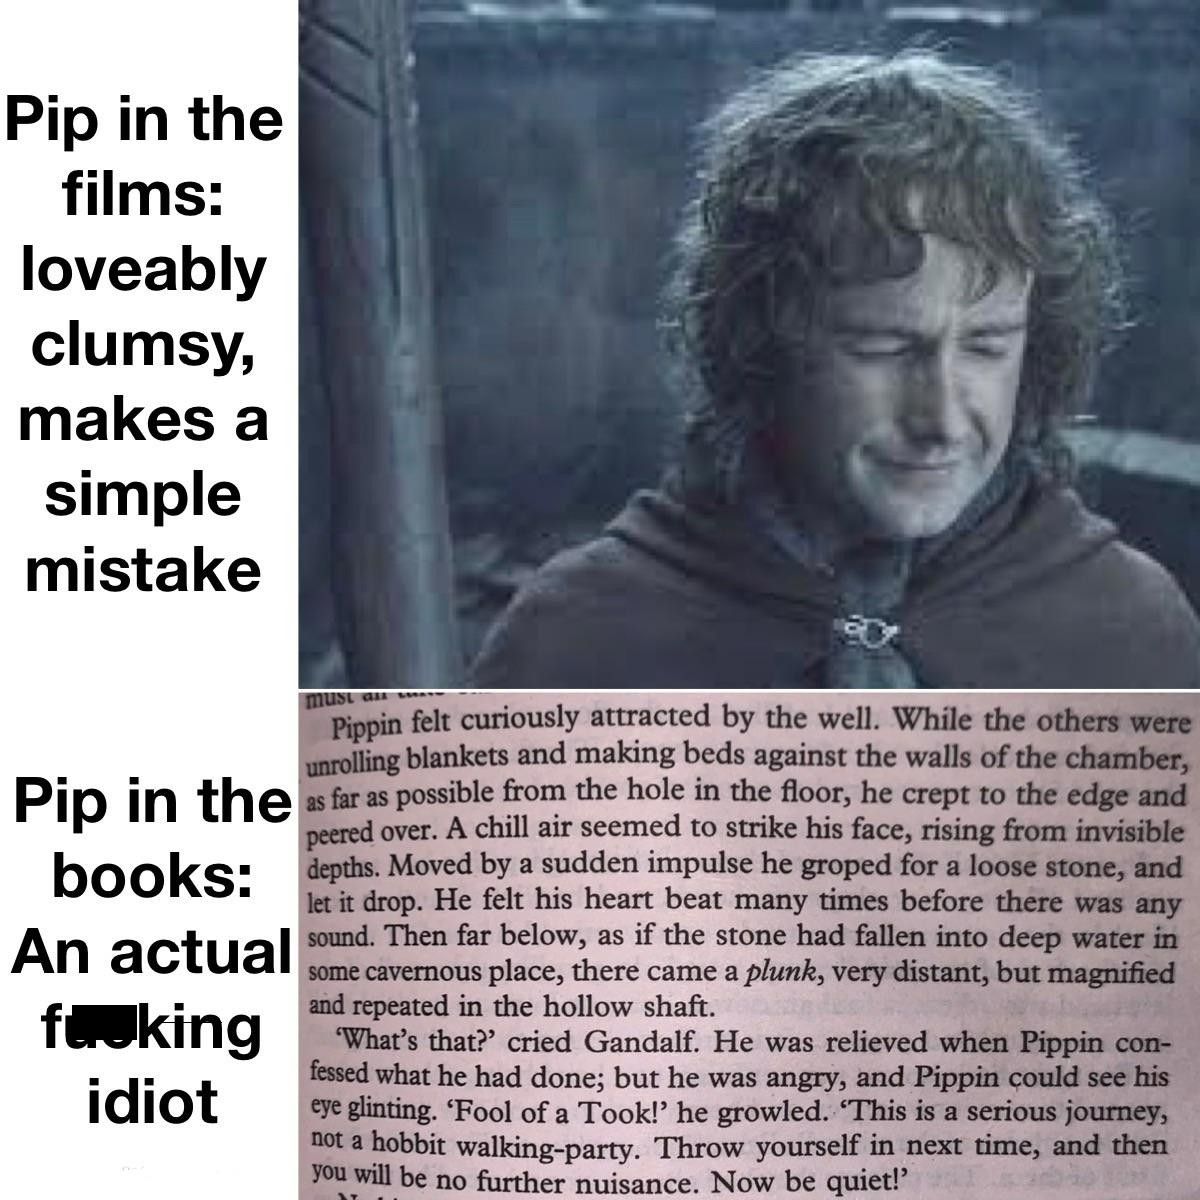 A Meme of Pippin comparing his actions in the book to the movie from The Lord of the Rings